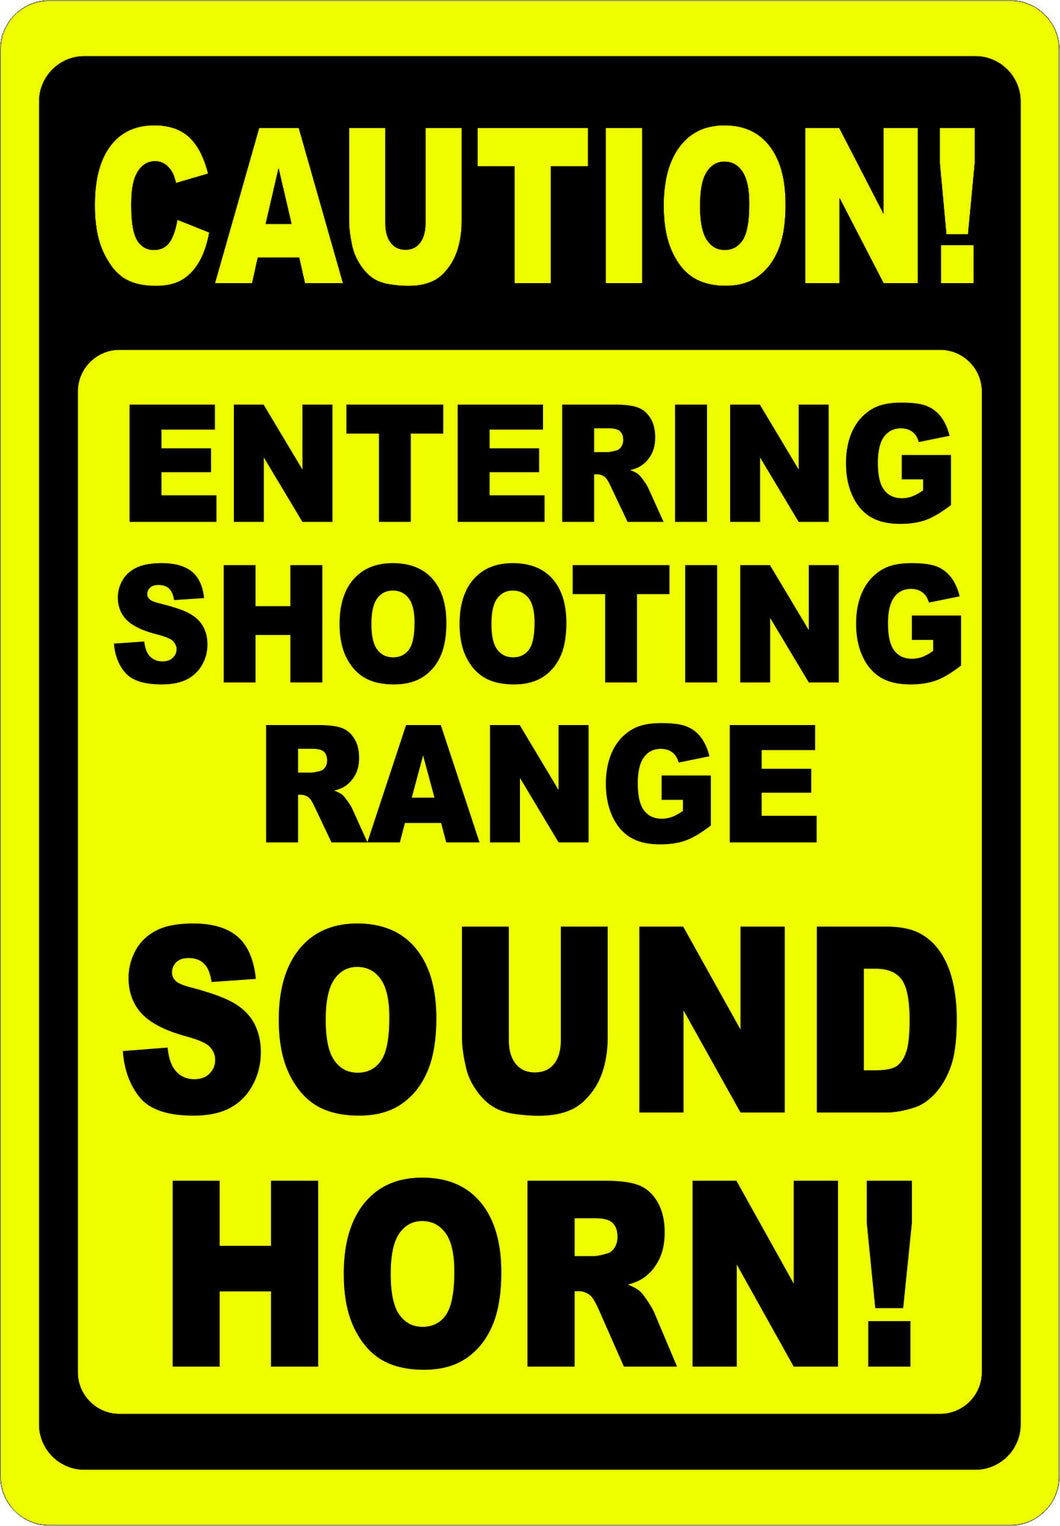 Caution Entering Shooting Range Sound Horn Sign - Signs & Decals by SalaGraphics